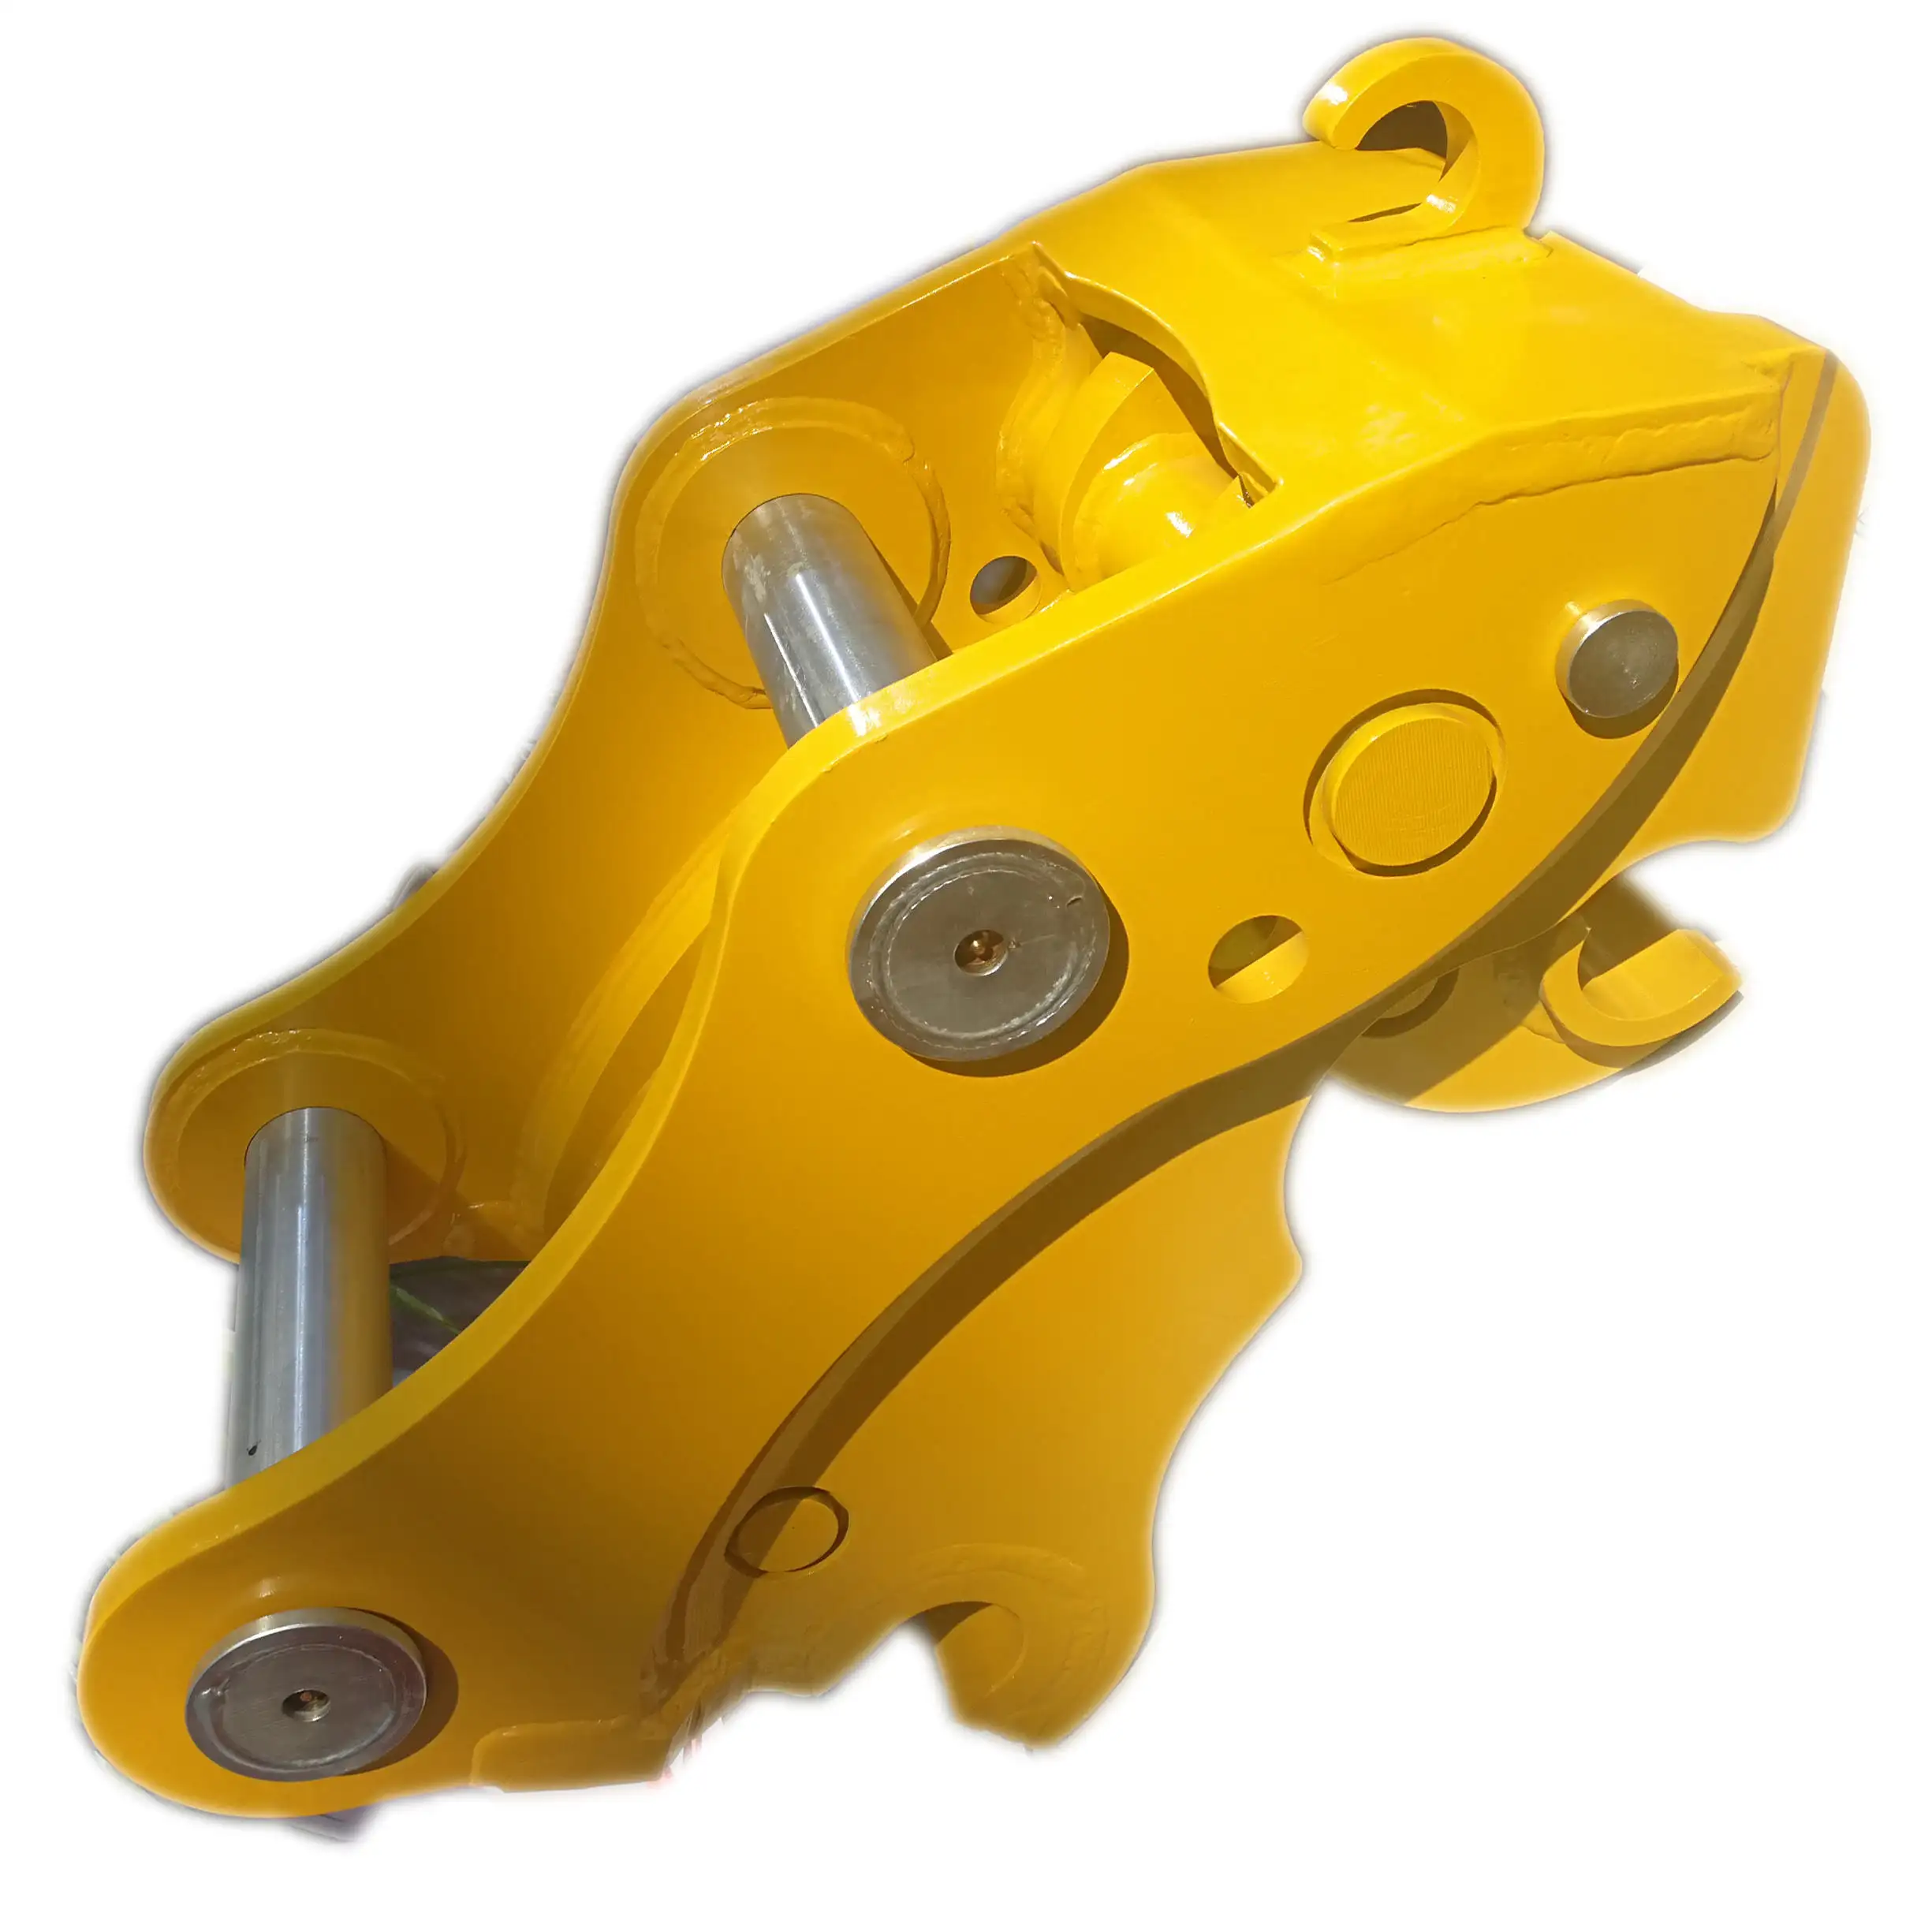 There are multiple models of high-efficiency quick coupler suitable for 6-9 tons of excavators